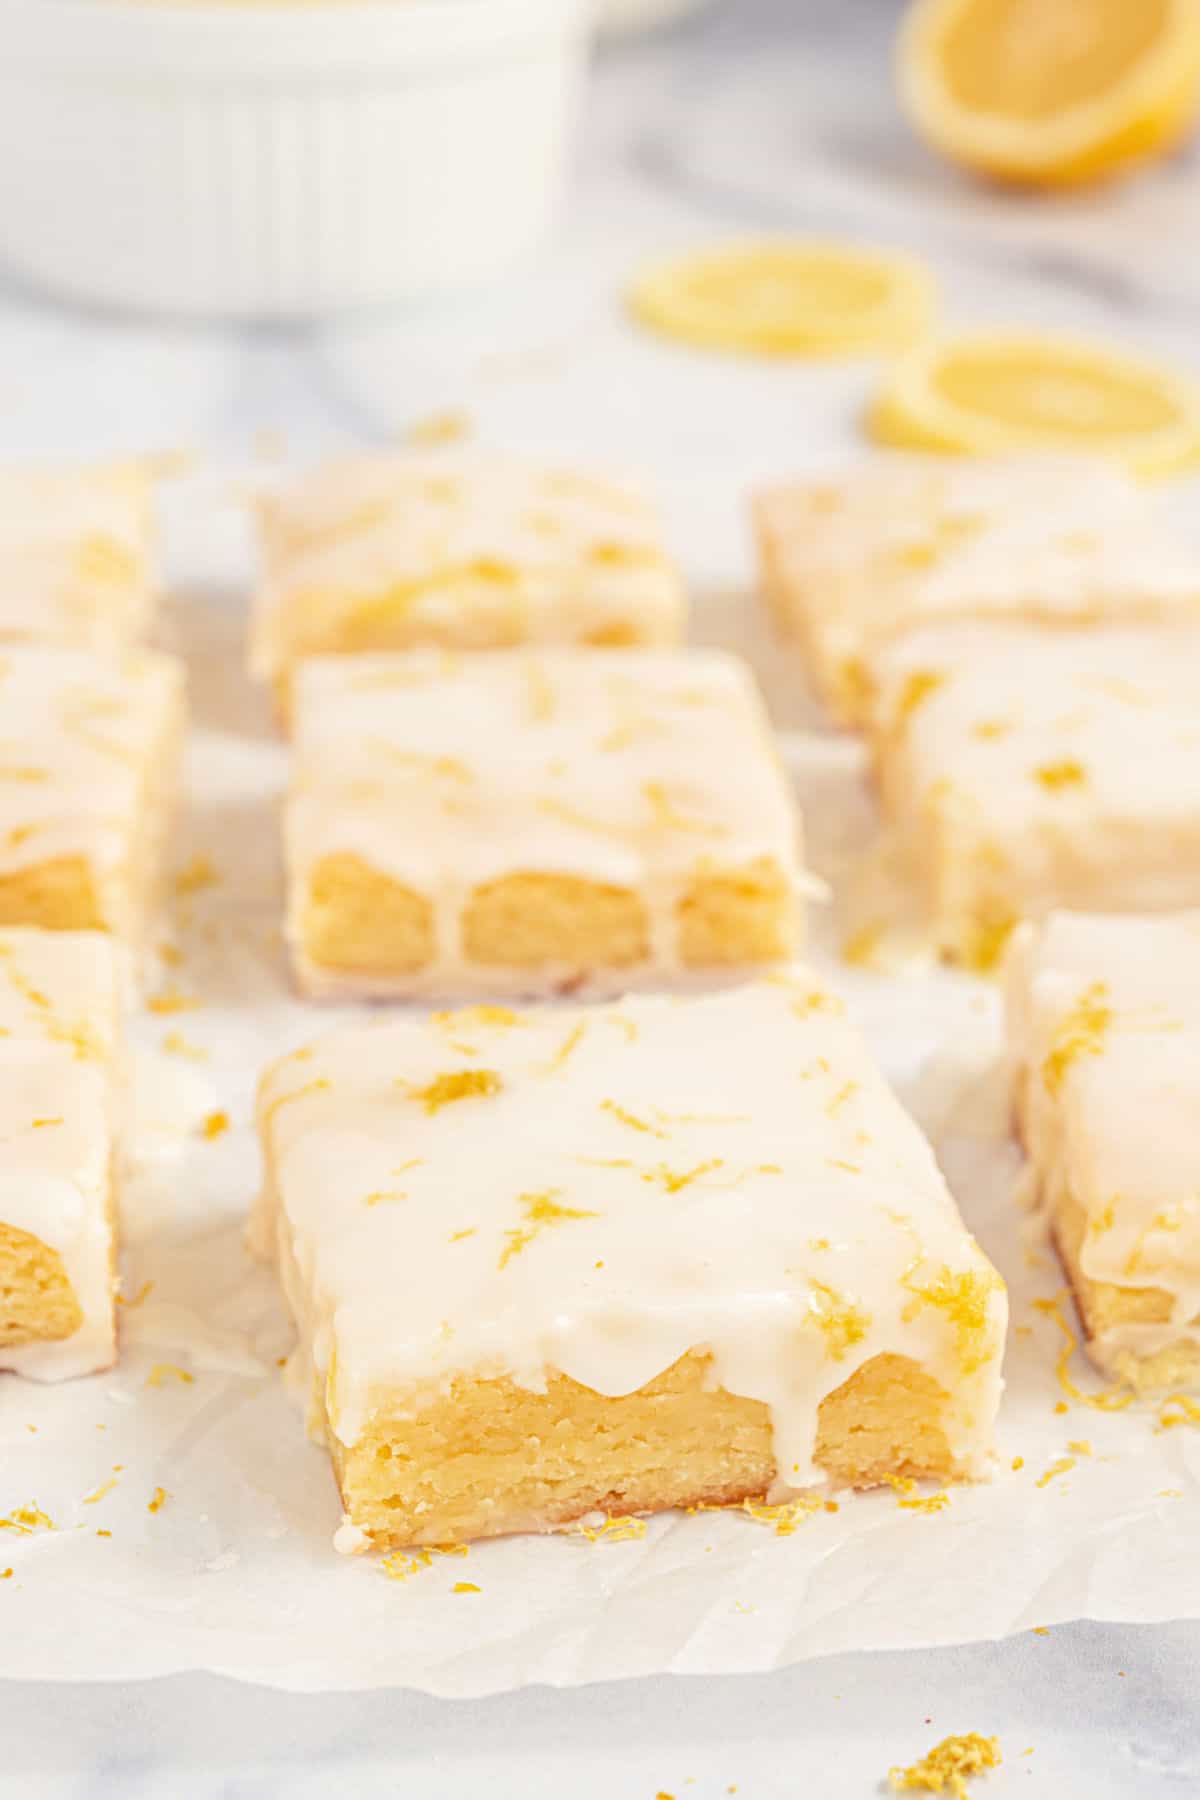 Lemon brownies with icing cut into squares on parchment paper.